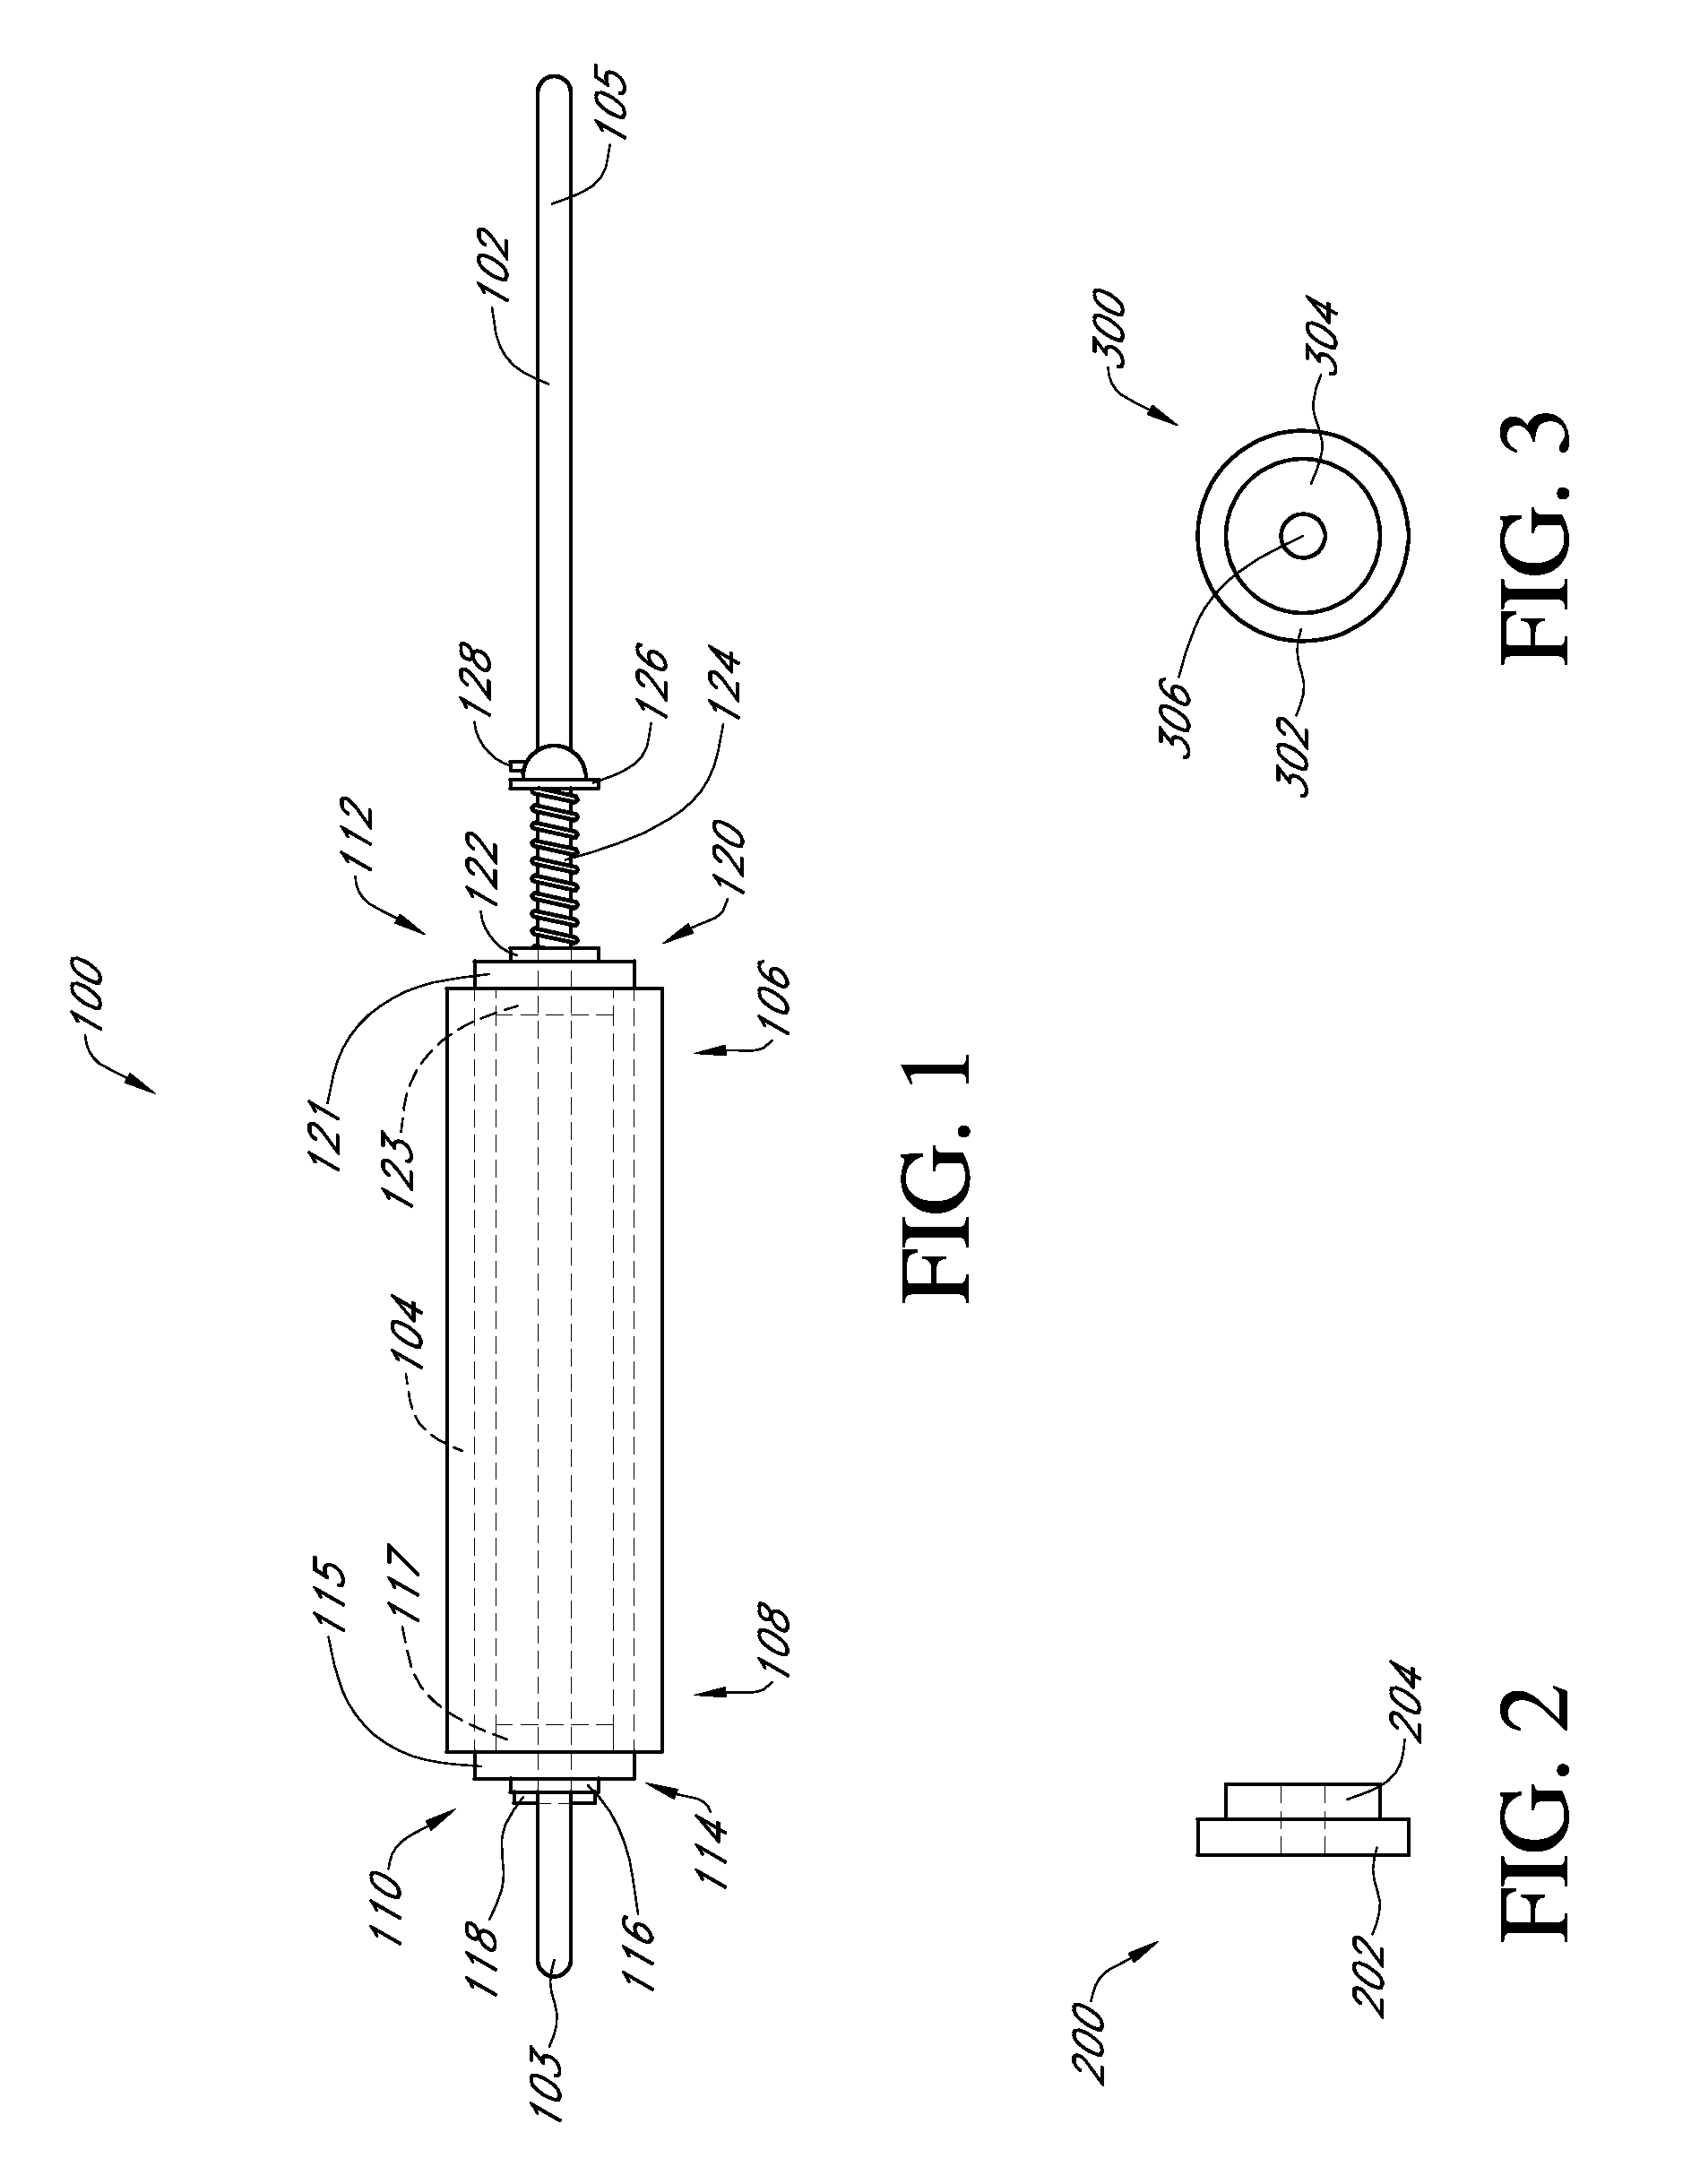 Wrapping apparatus